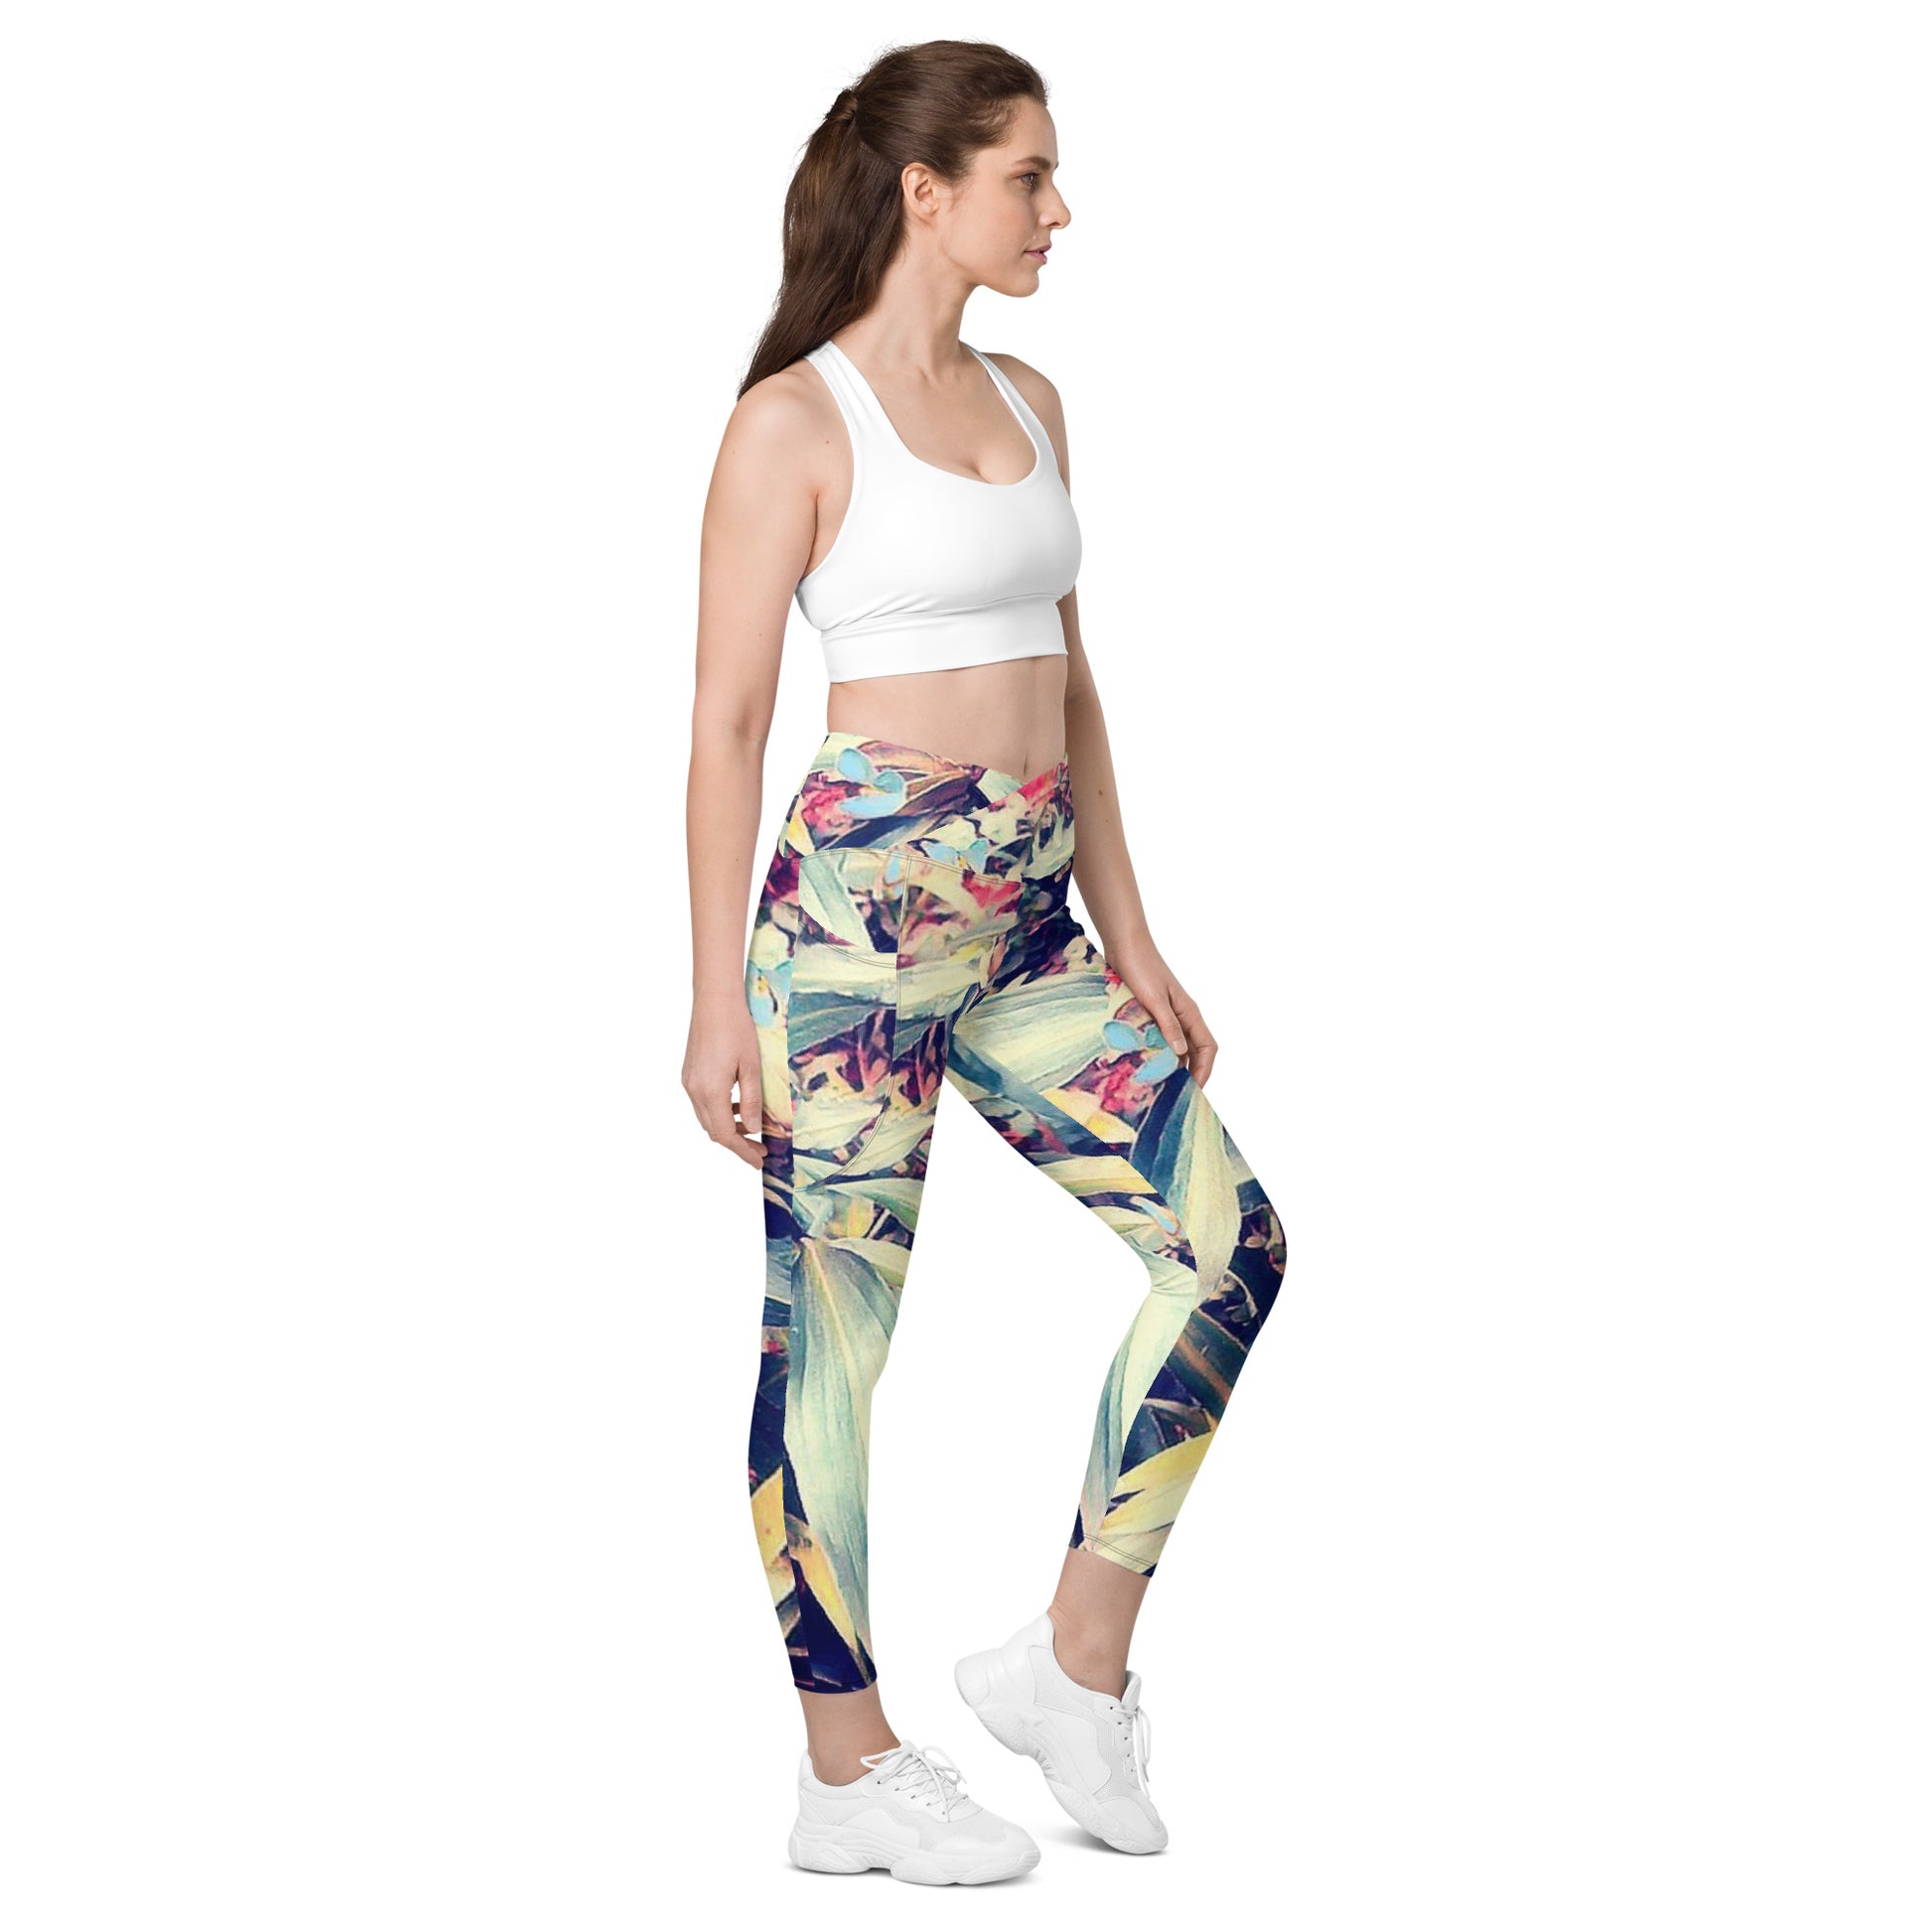 Tropical Crossover leggings with pockets - A. Mandaline Art